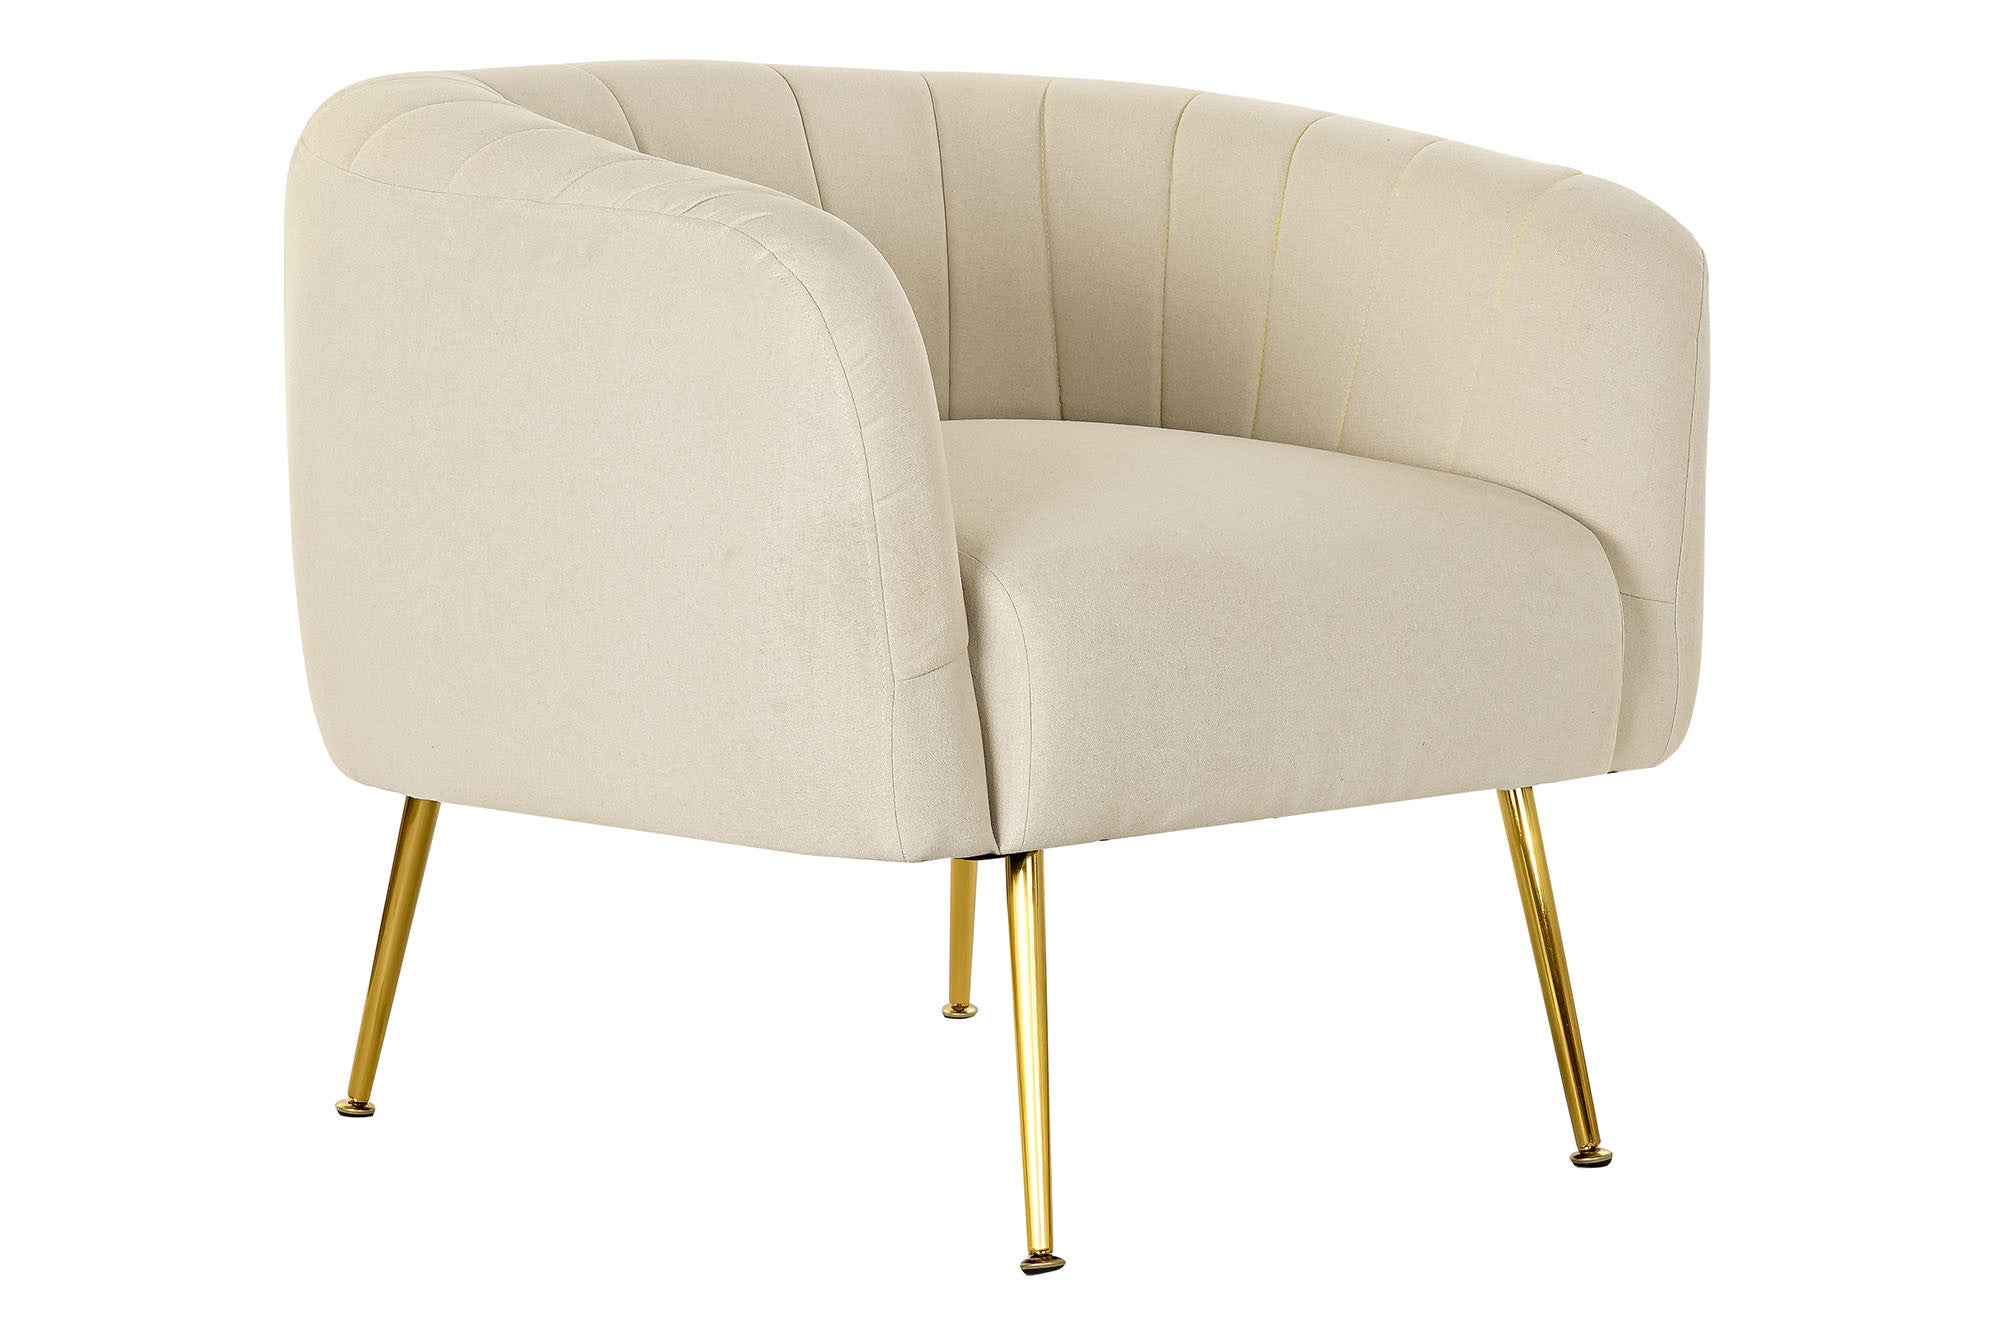 Contemporary Design Armchair Beige and Gold Metal Home Decor